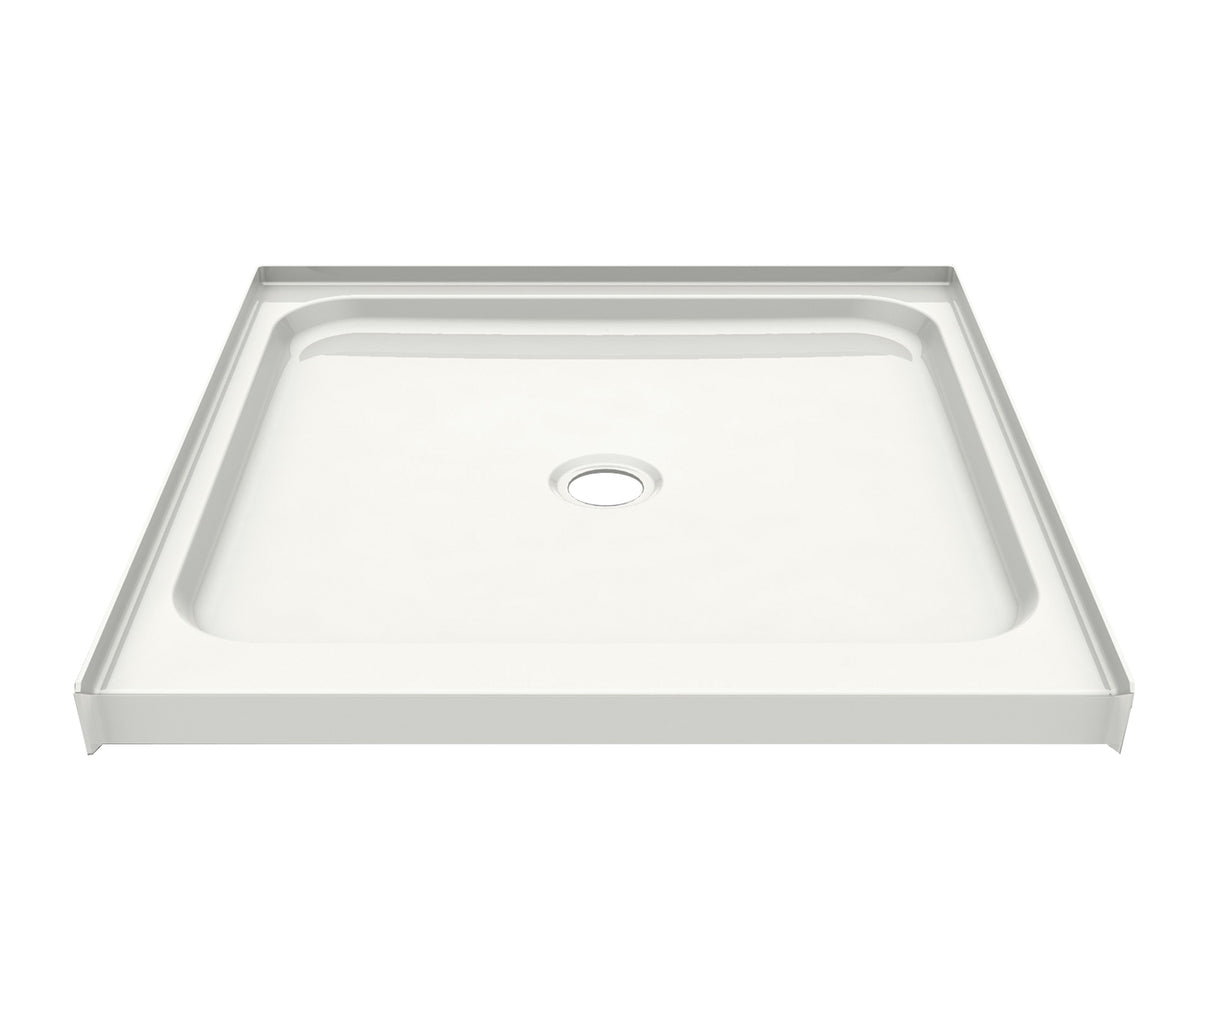 MAAX 145021-000-002-583 SPL 3232 AFR AcrylX Alcove Shower Base with Center Drain in White